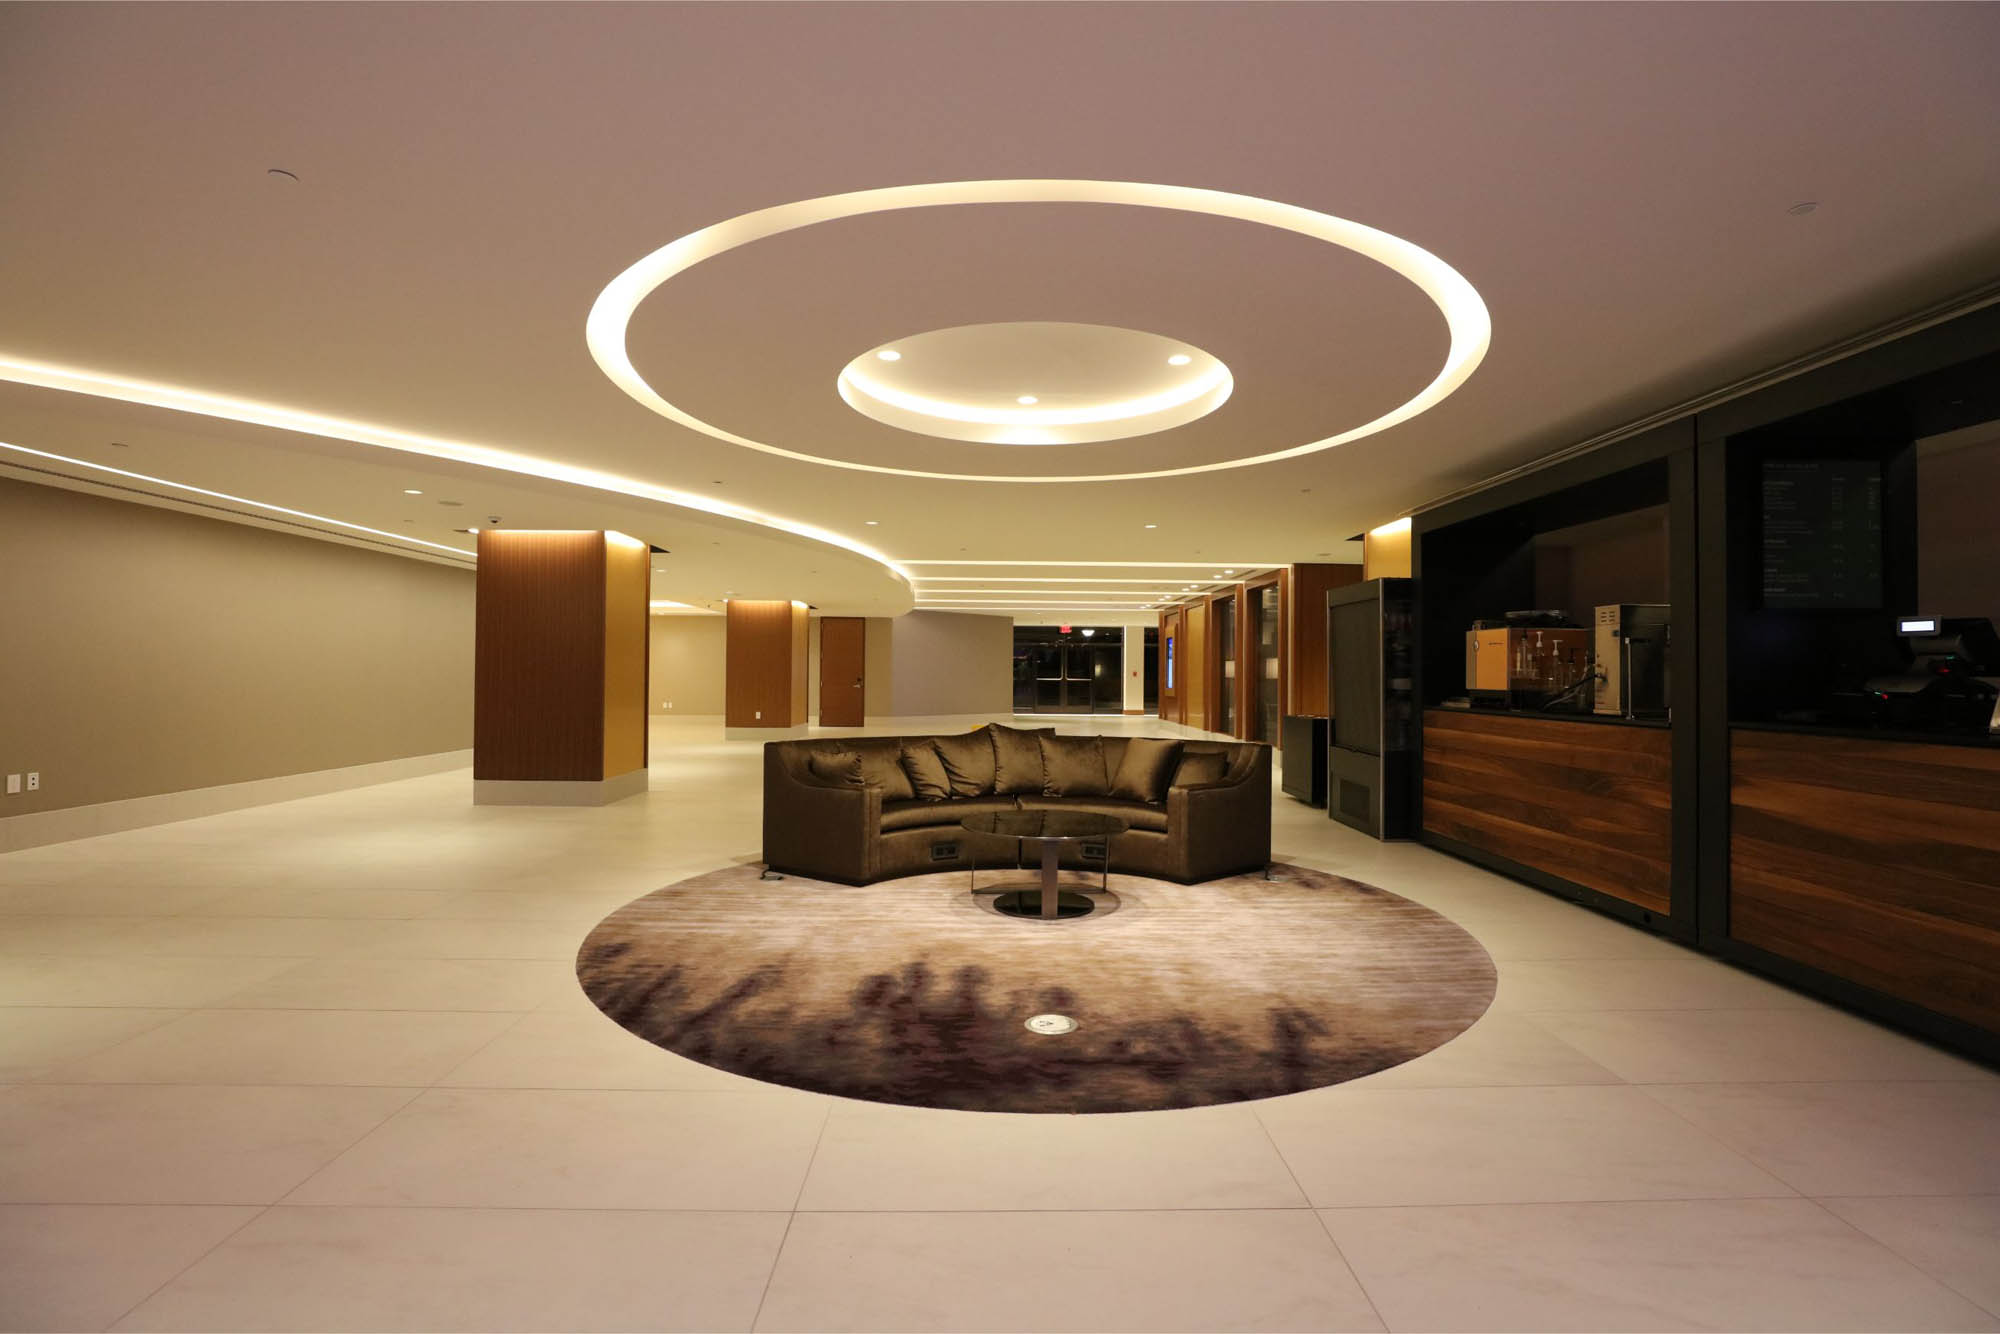 LED linear cove lighting accenting architectural ceiling elements in a hotel lobby. Boca Lighting and Controls